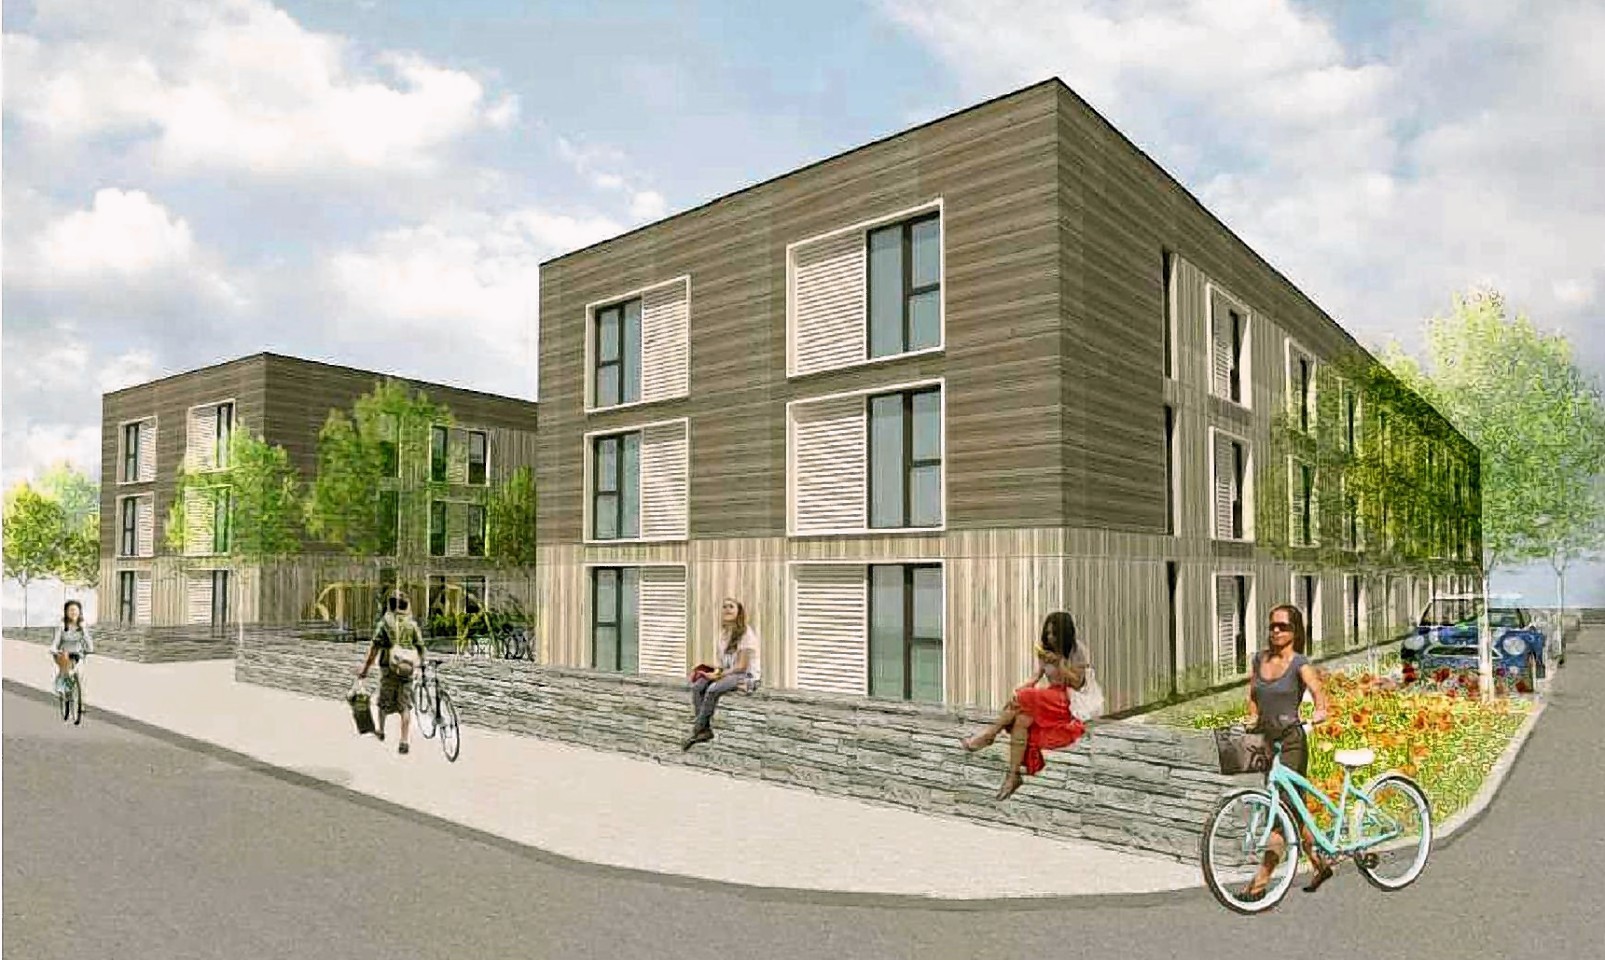 The proposed flats at Inverness Campus